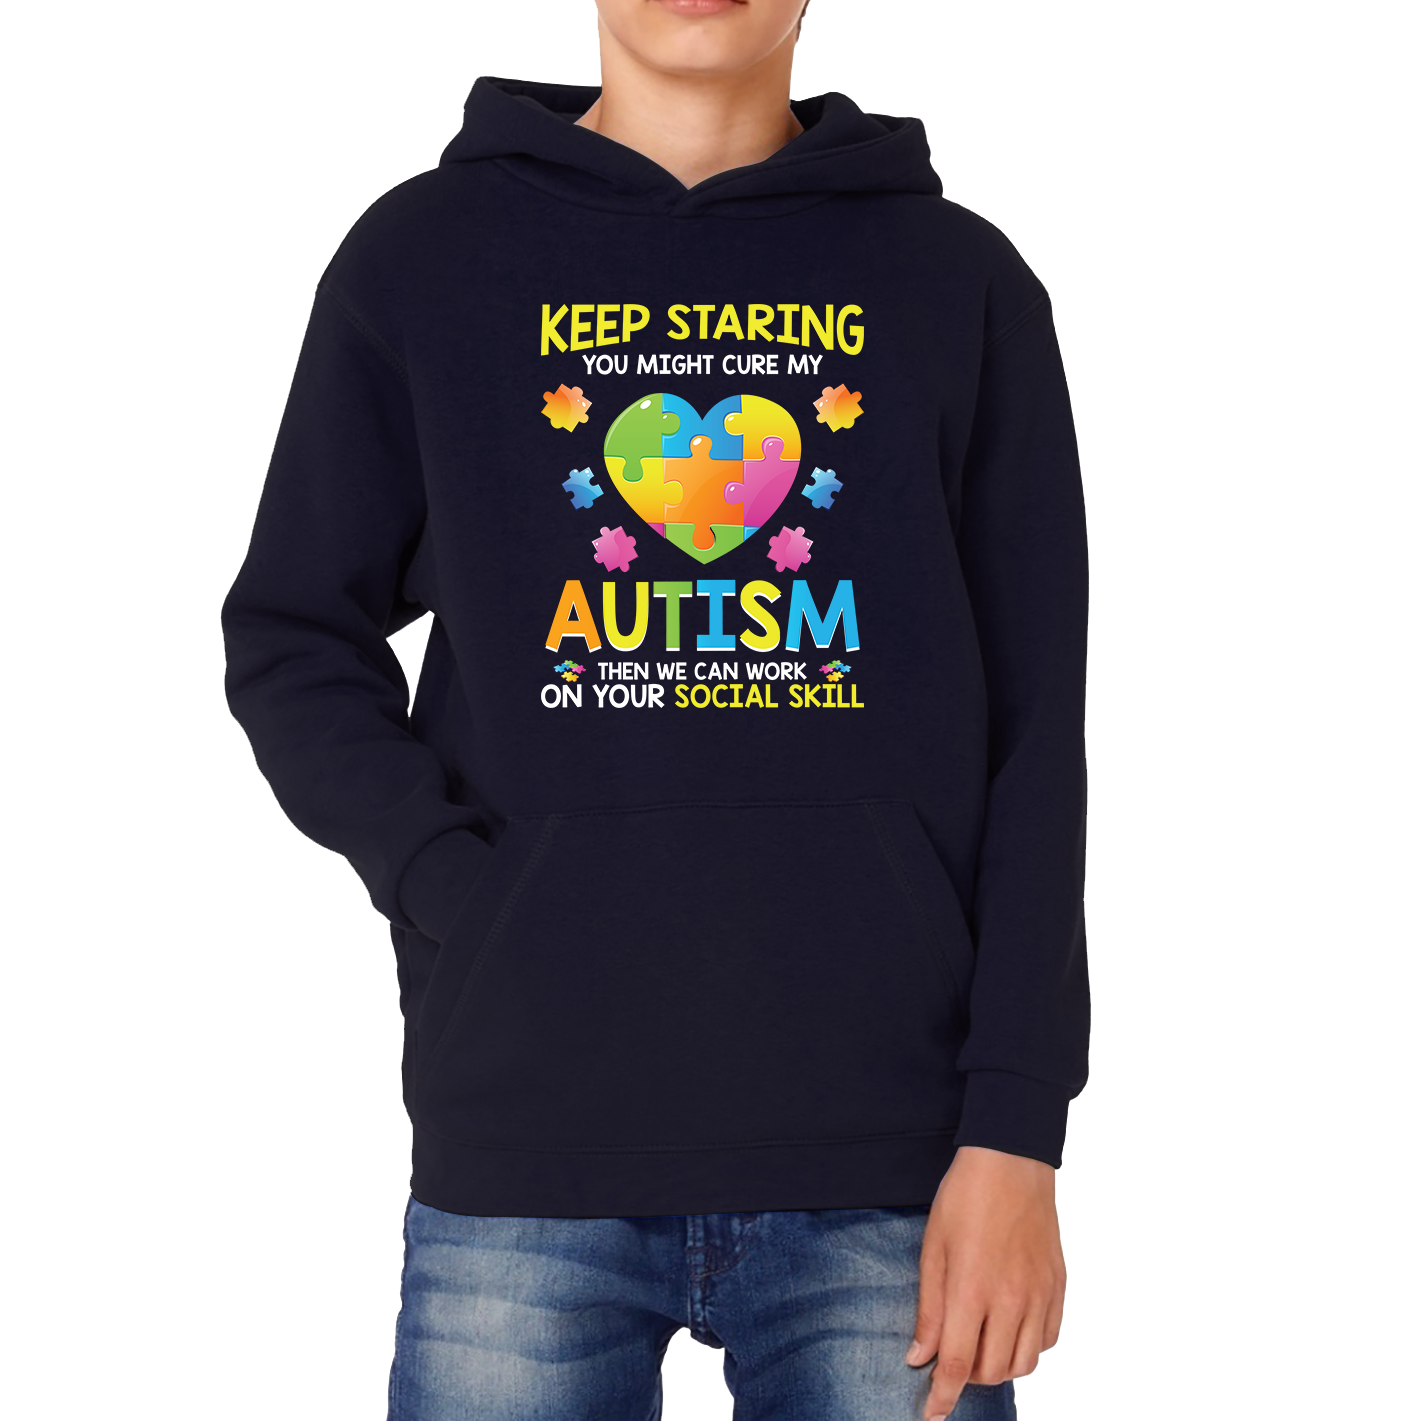 Keep Staring You Might Cure My Autism Then We Can Work On Your Social Skill Kids Hoodie